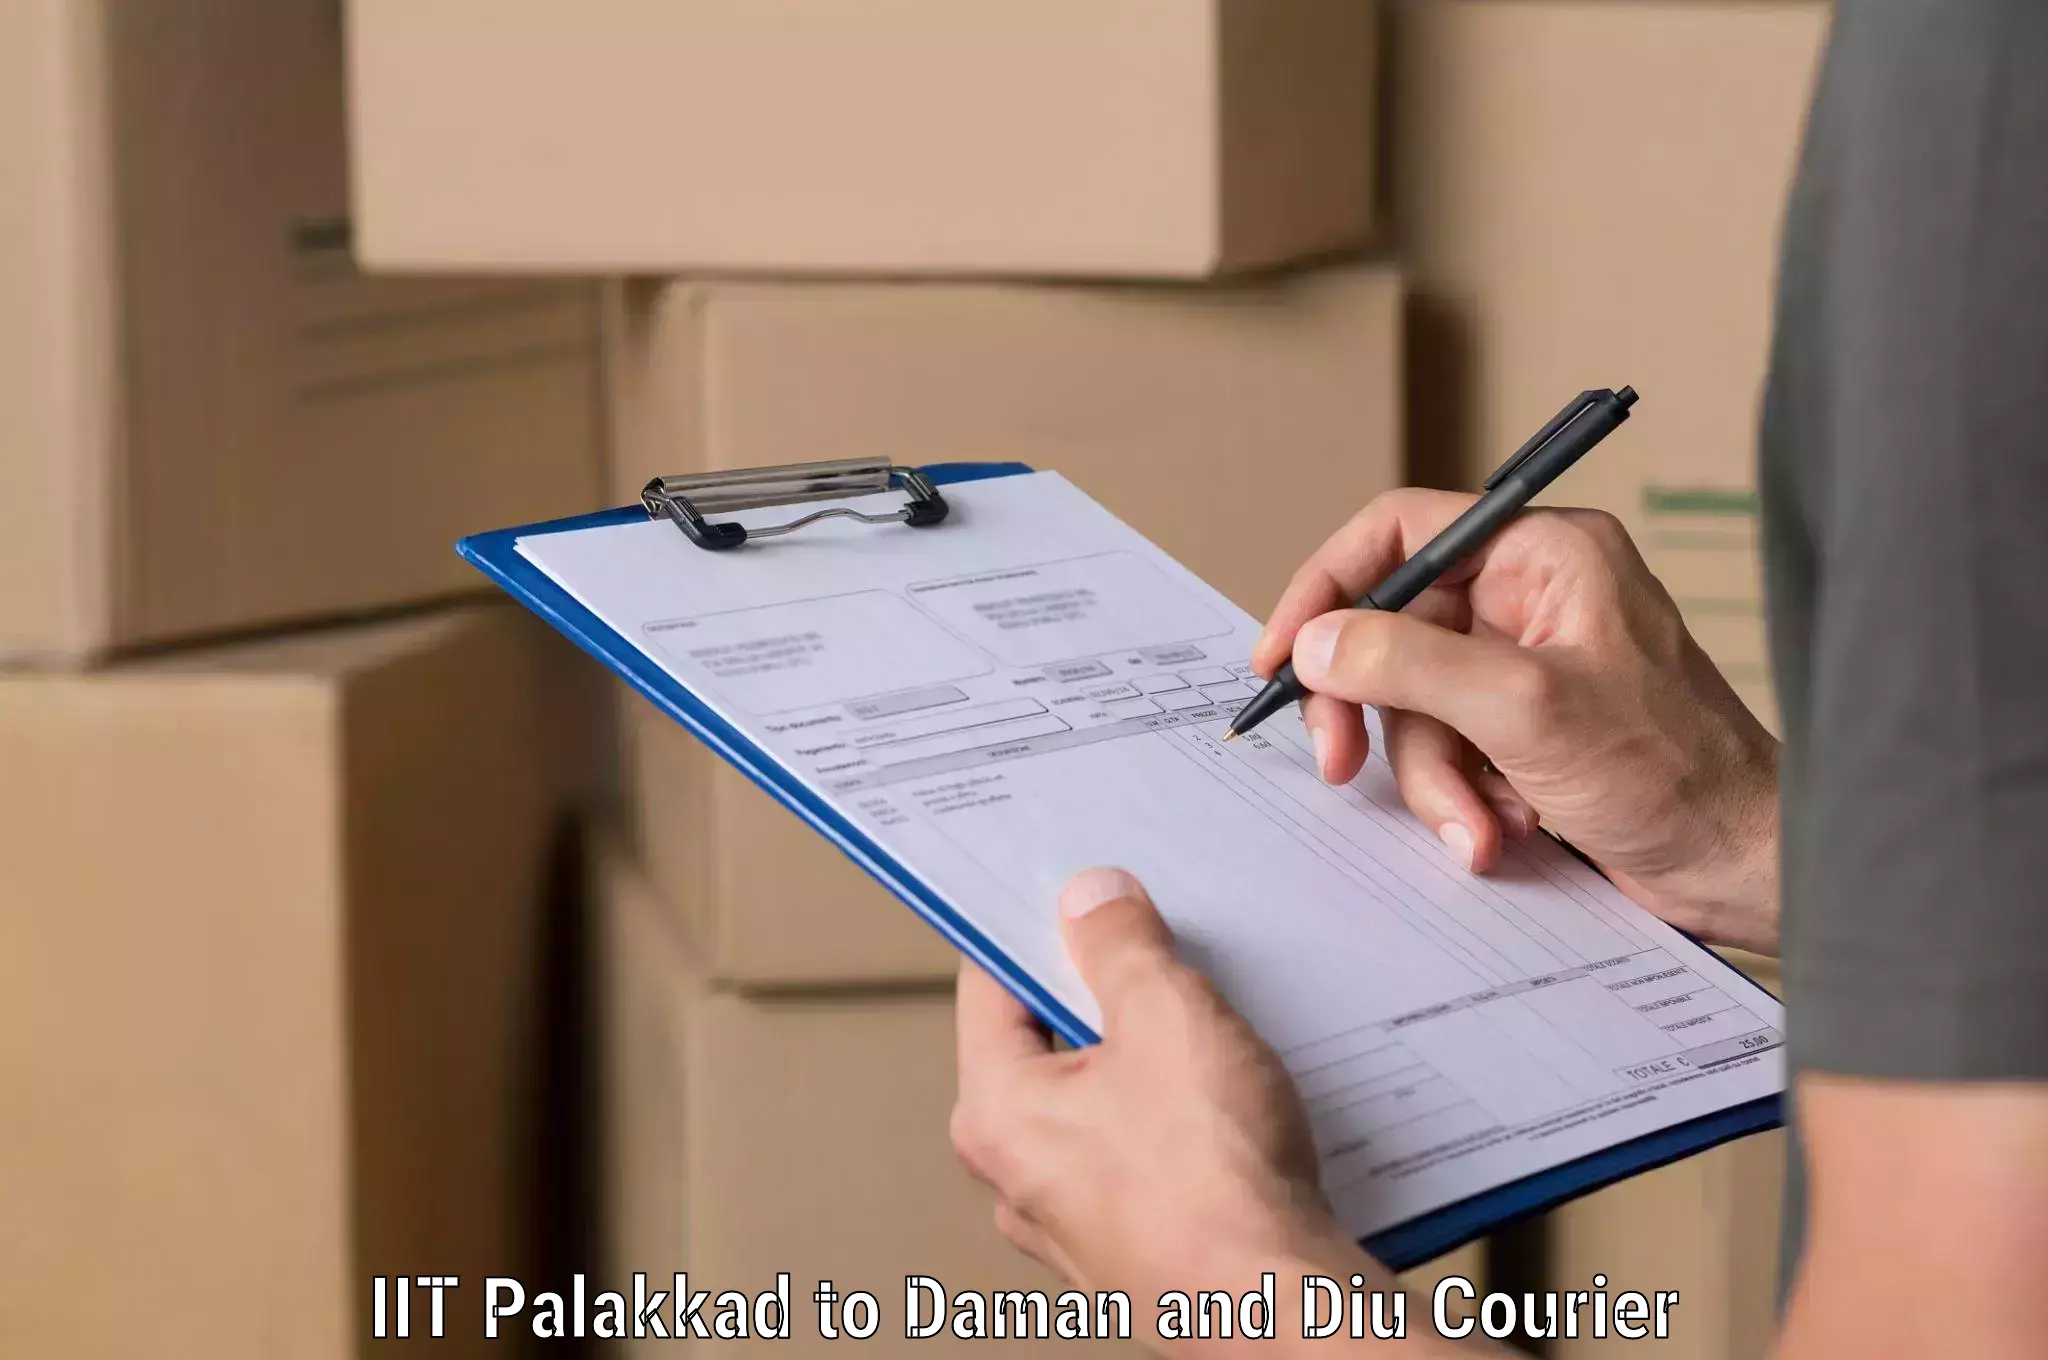 Personal courier services IIT Palakkad to Daman and Diu